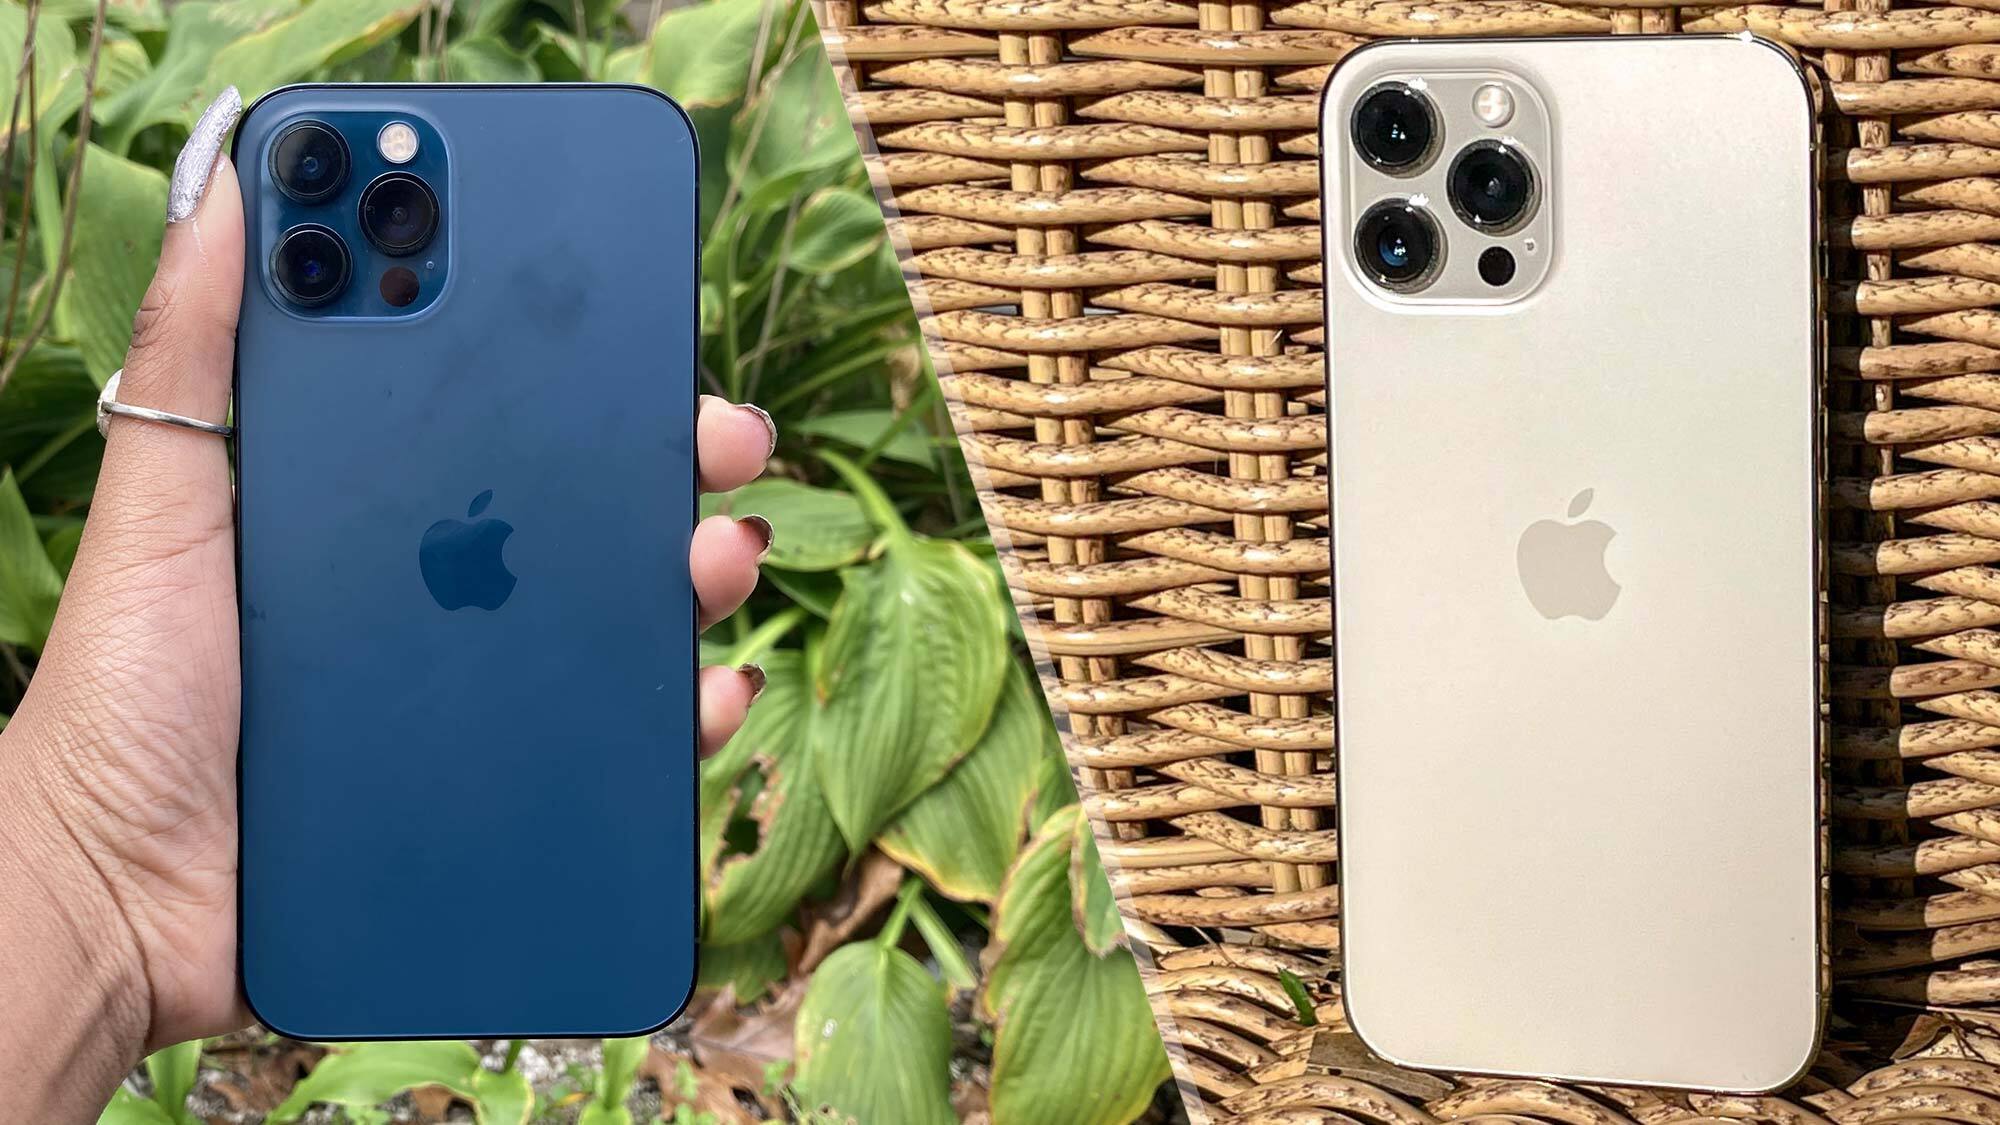 iPhone 12 pro vs iPhone 12: What's the difference and which is